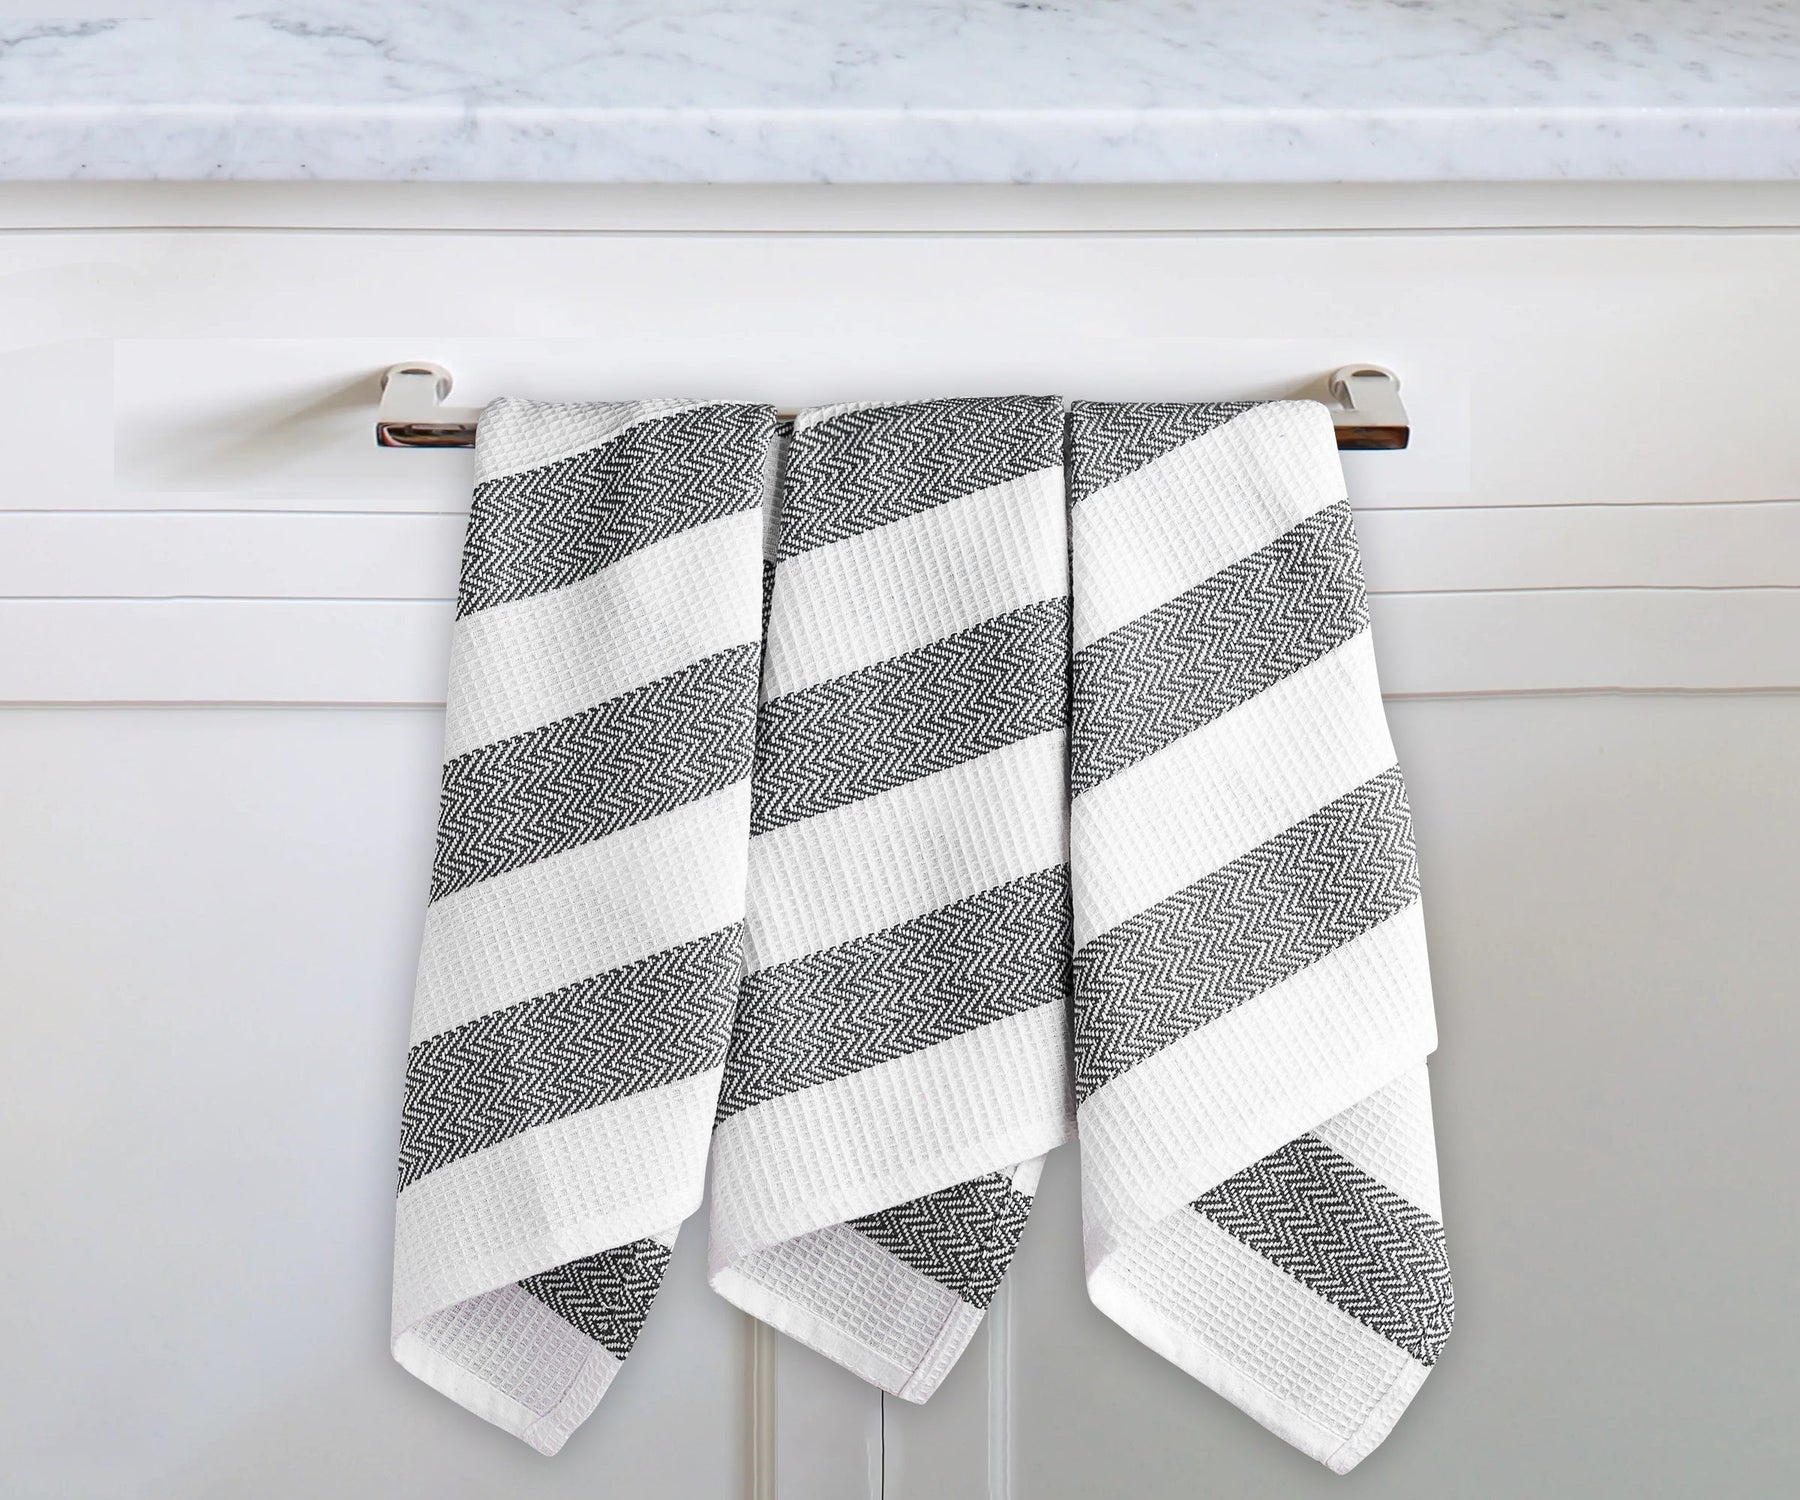 Kitchen towels in various colors and designs to complement your kitchen decor.